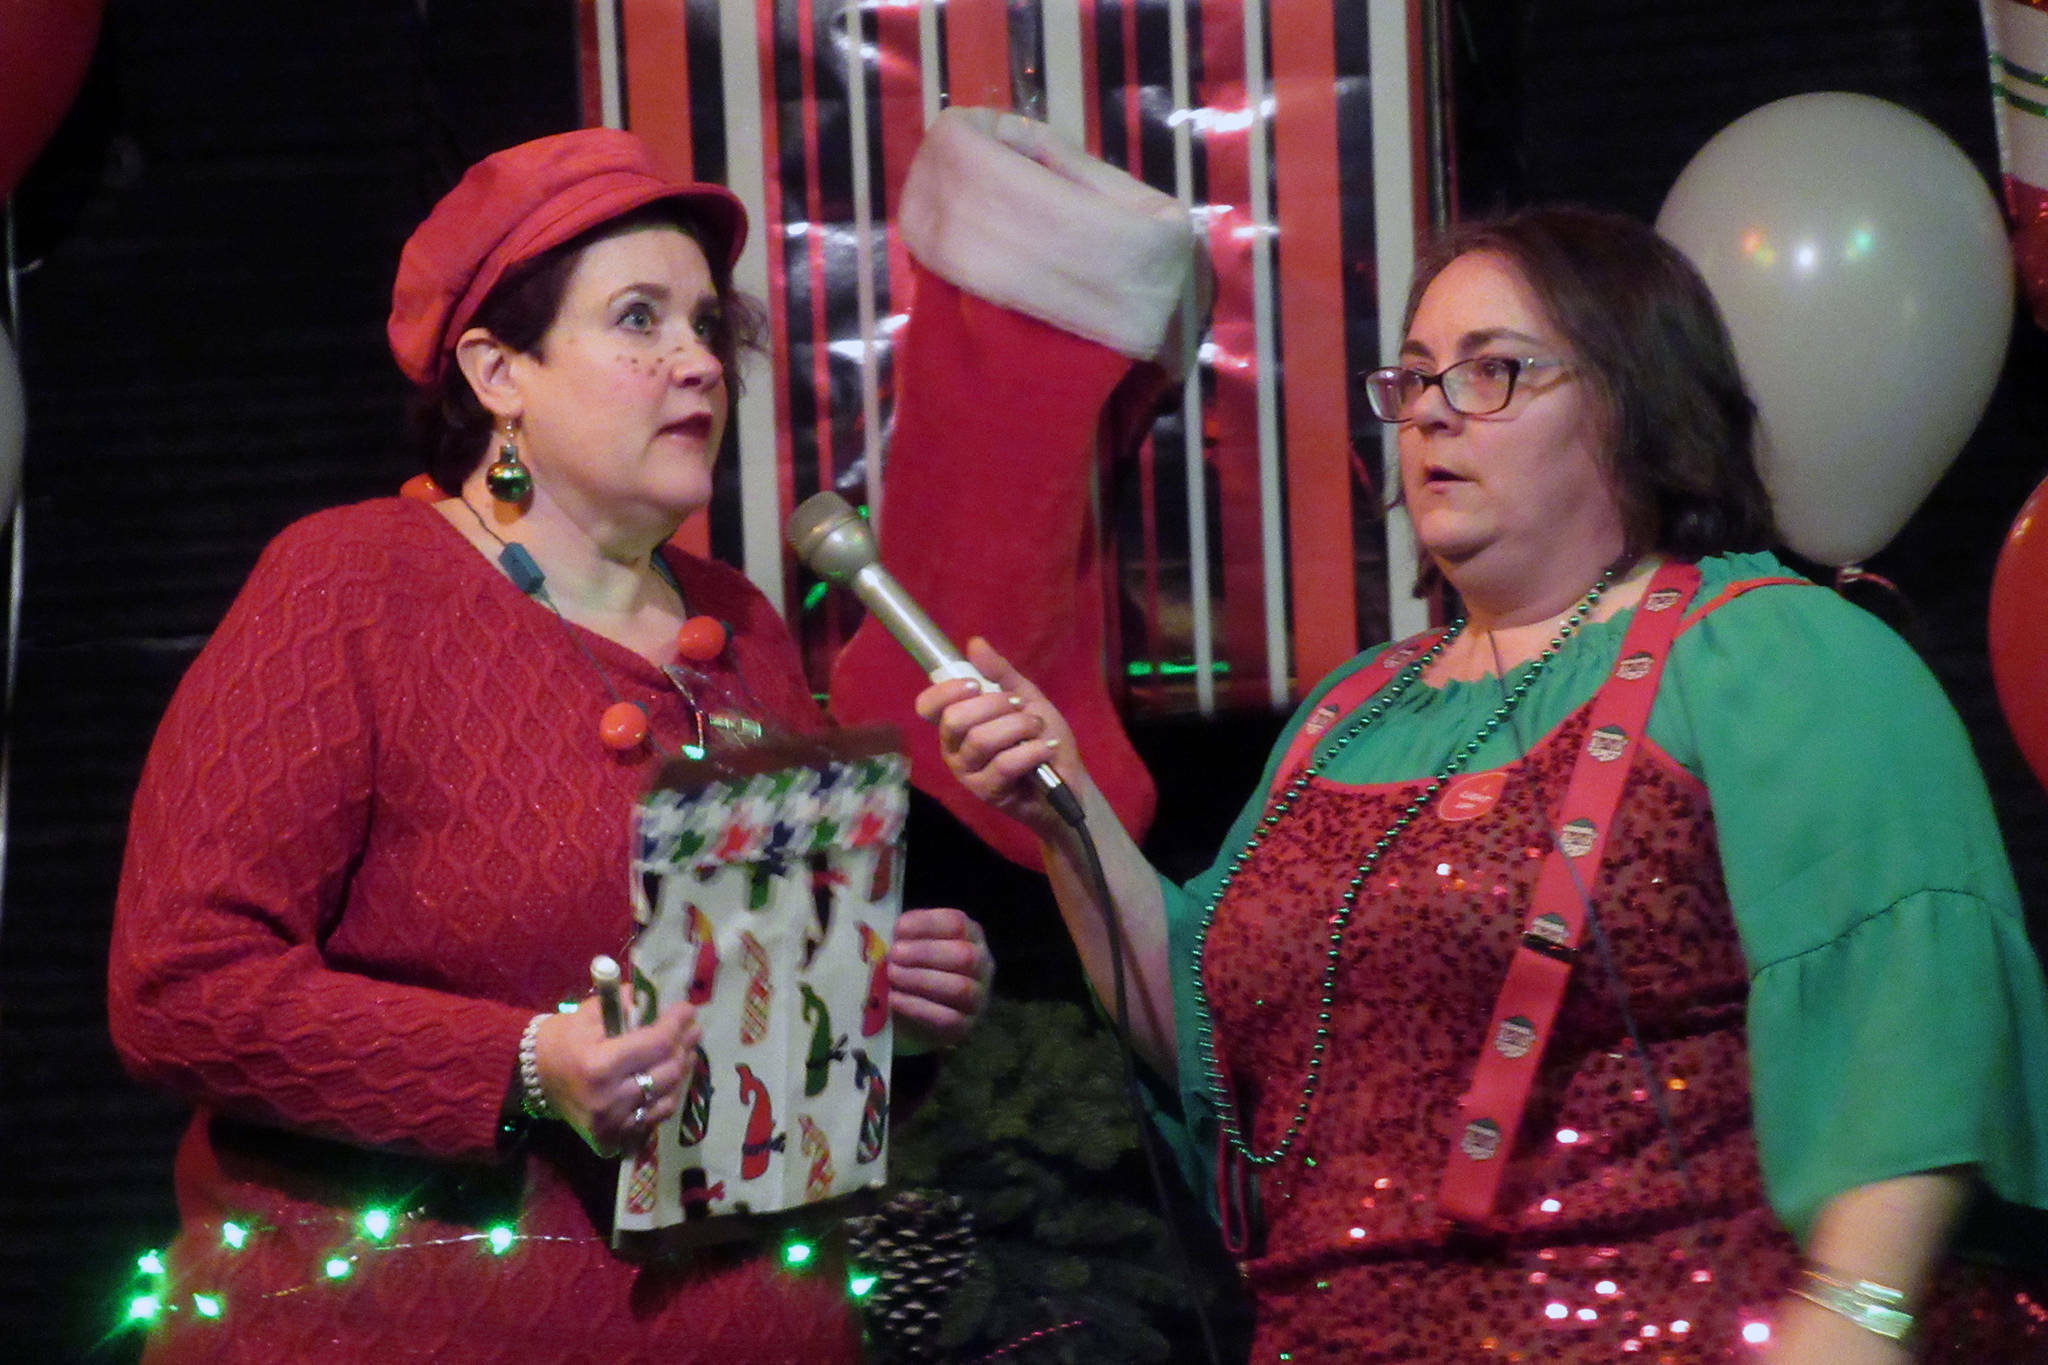 Amy Dressel talks to boss elf Collette Costa about how they’re going to bail reindeer out of jail during the annual Christmas extravaganza show at the Gold Town Theater on Saturday, Jan. 5, 2019. (Ben Hohenstatt / Juneau Empire file photo)